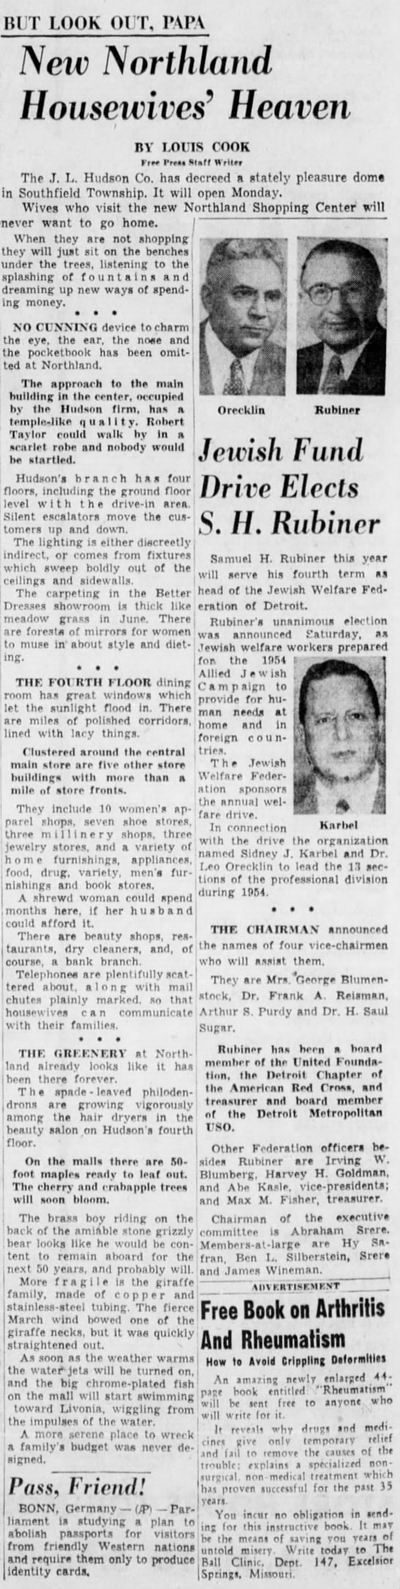 Northland Center - March 1954 Free Press Article